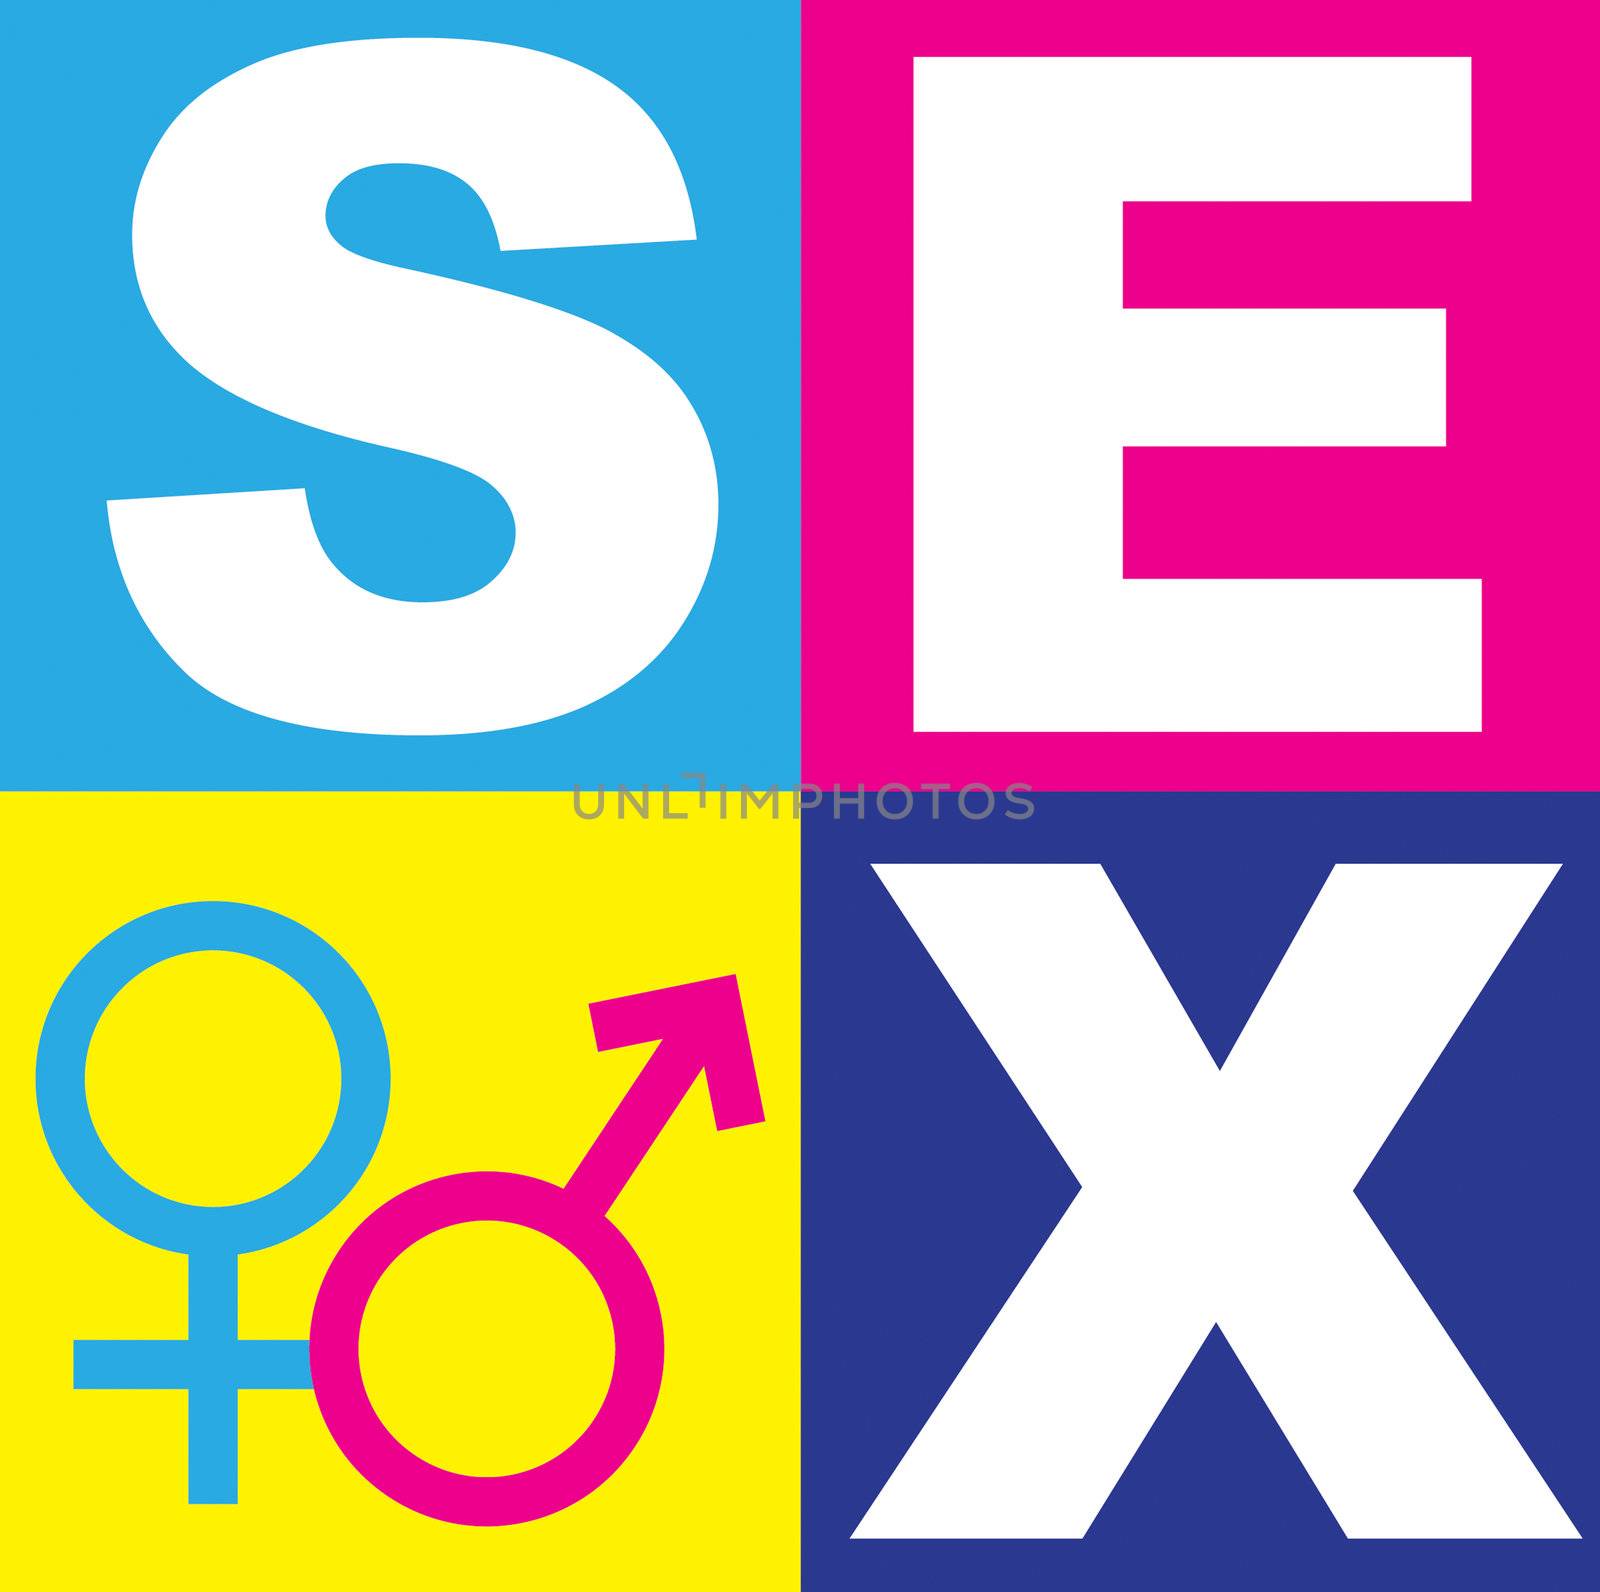 A graphic representation of sex, love and relationships between man and women in the context of sex education. Using text, graphics and alchemical symbols on bright colored blocks of color.